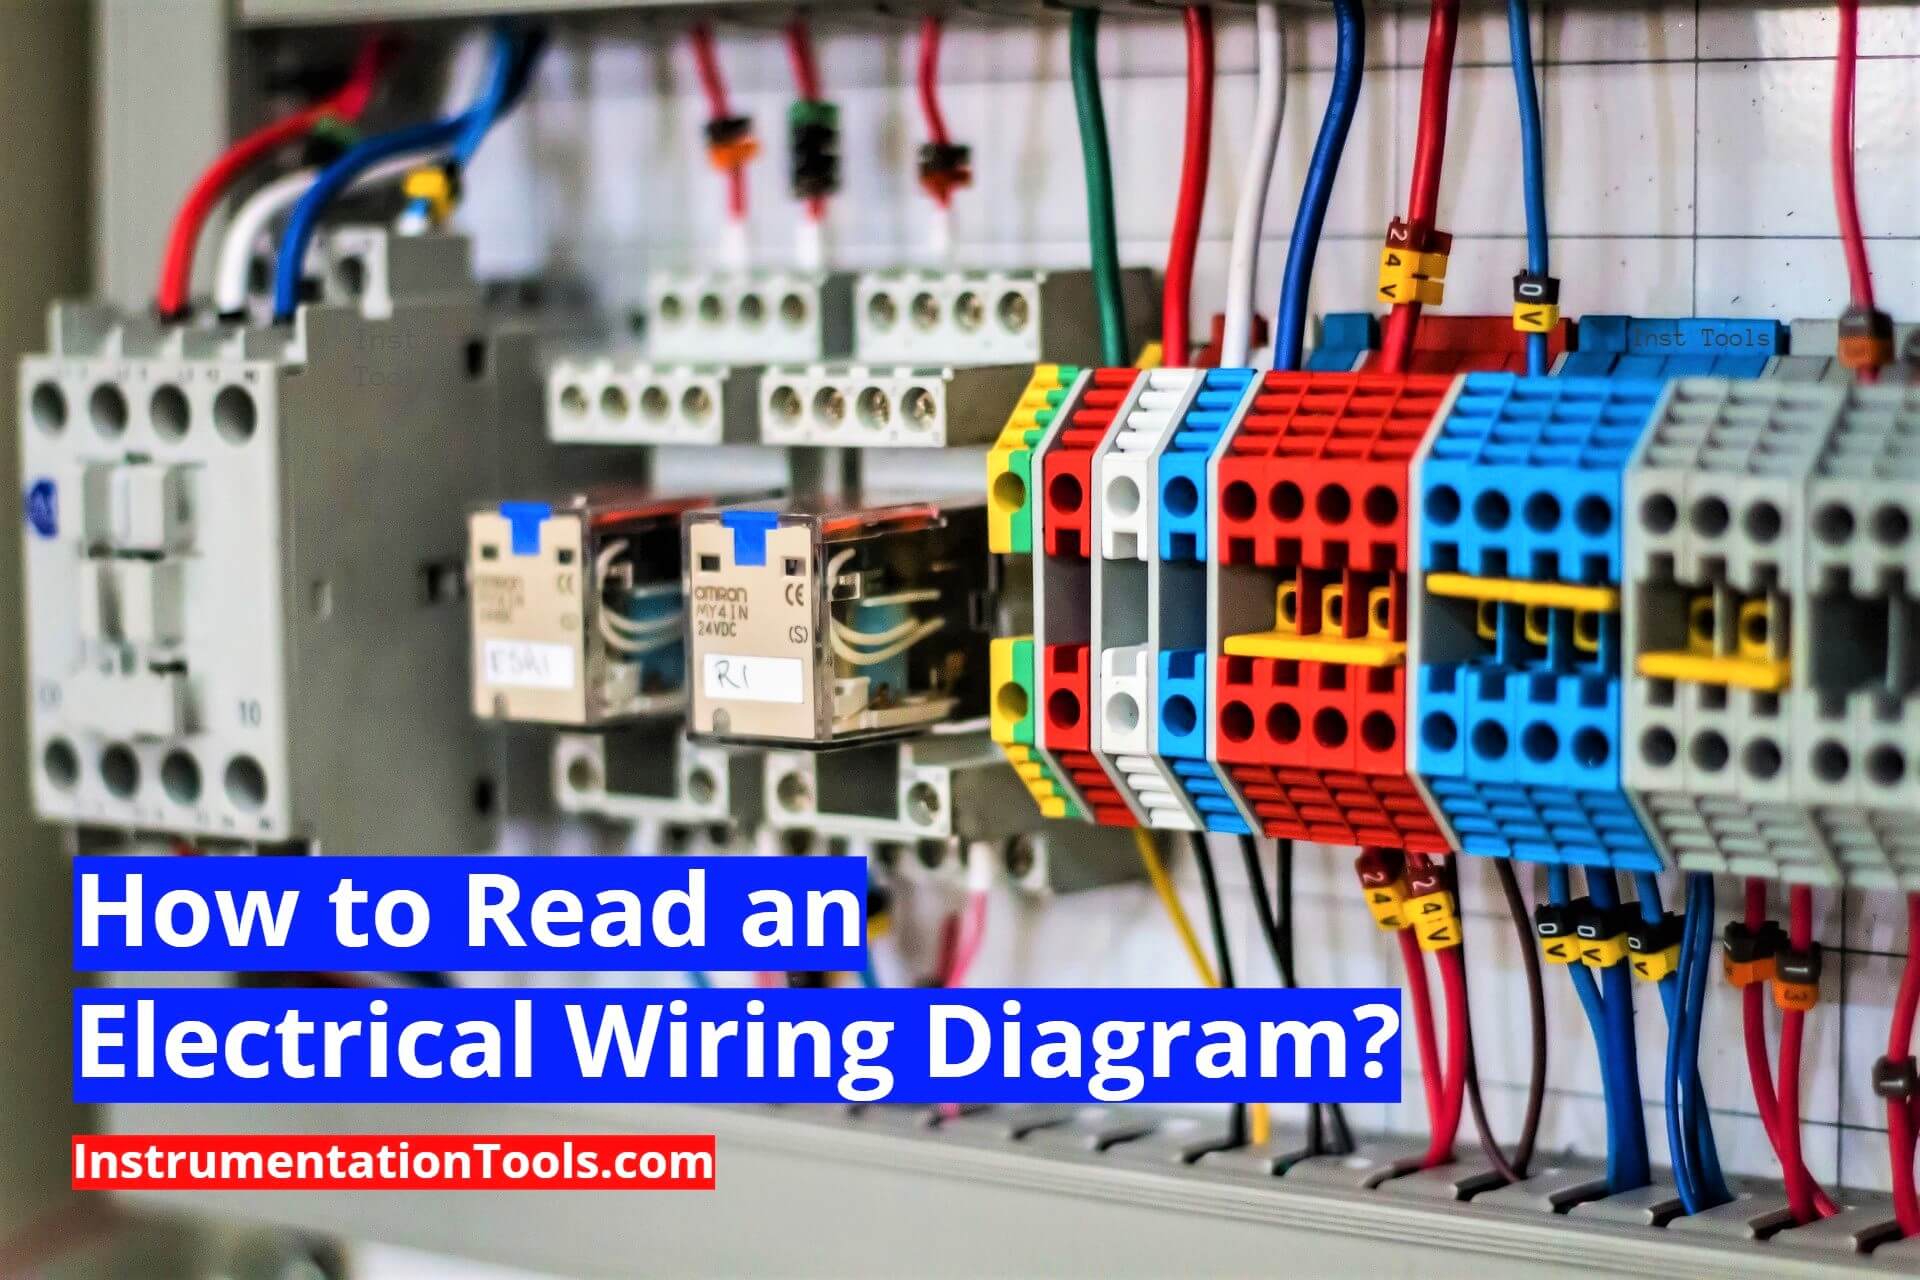 Electrical Wiring Diagram, How To Learn Electrical Panel Wiring Diagram